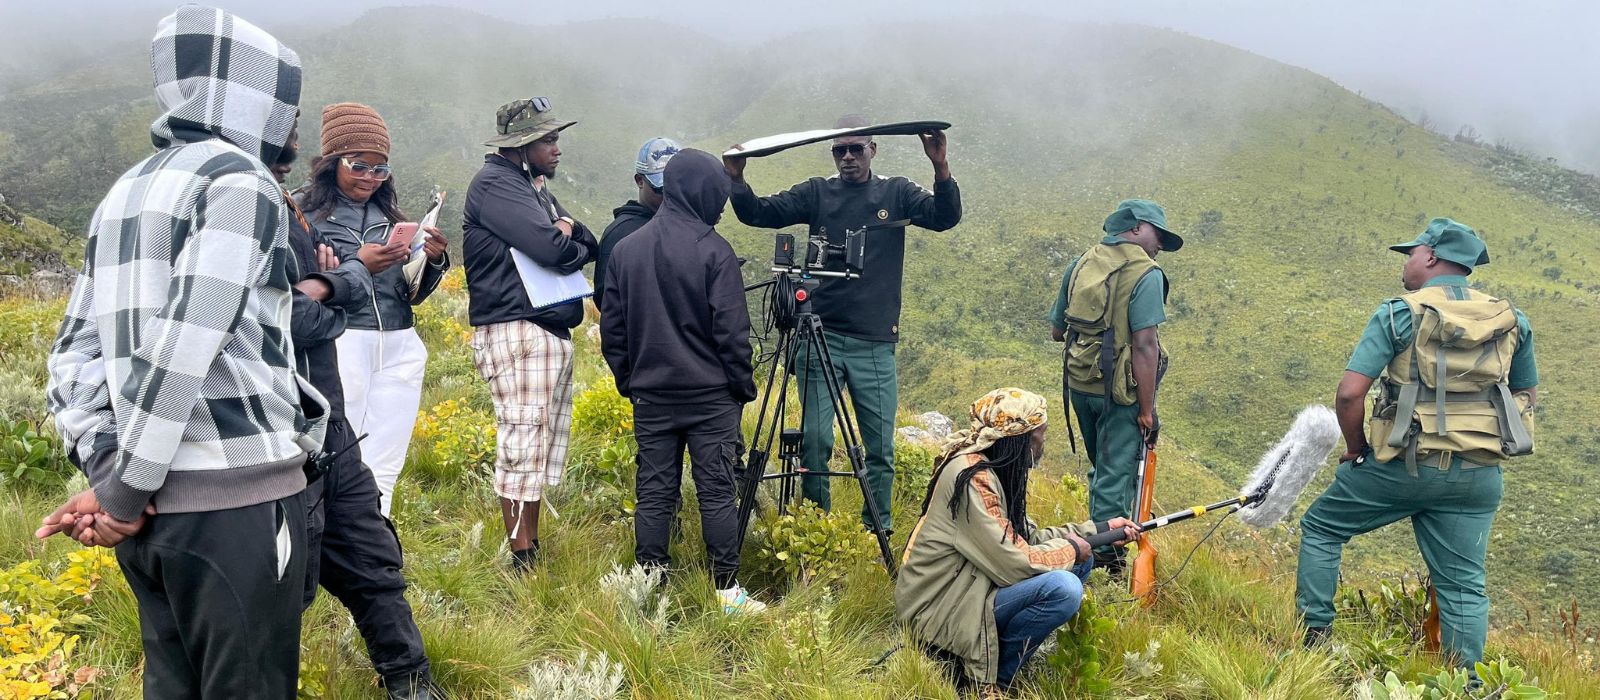 ‘Nyanga’ the movie, a tale of courage and conservation amidst adversity